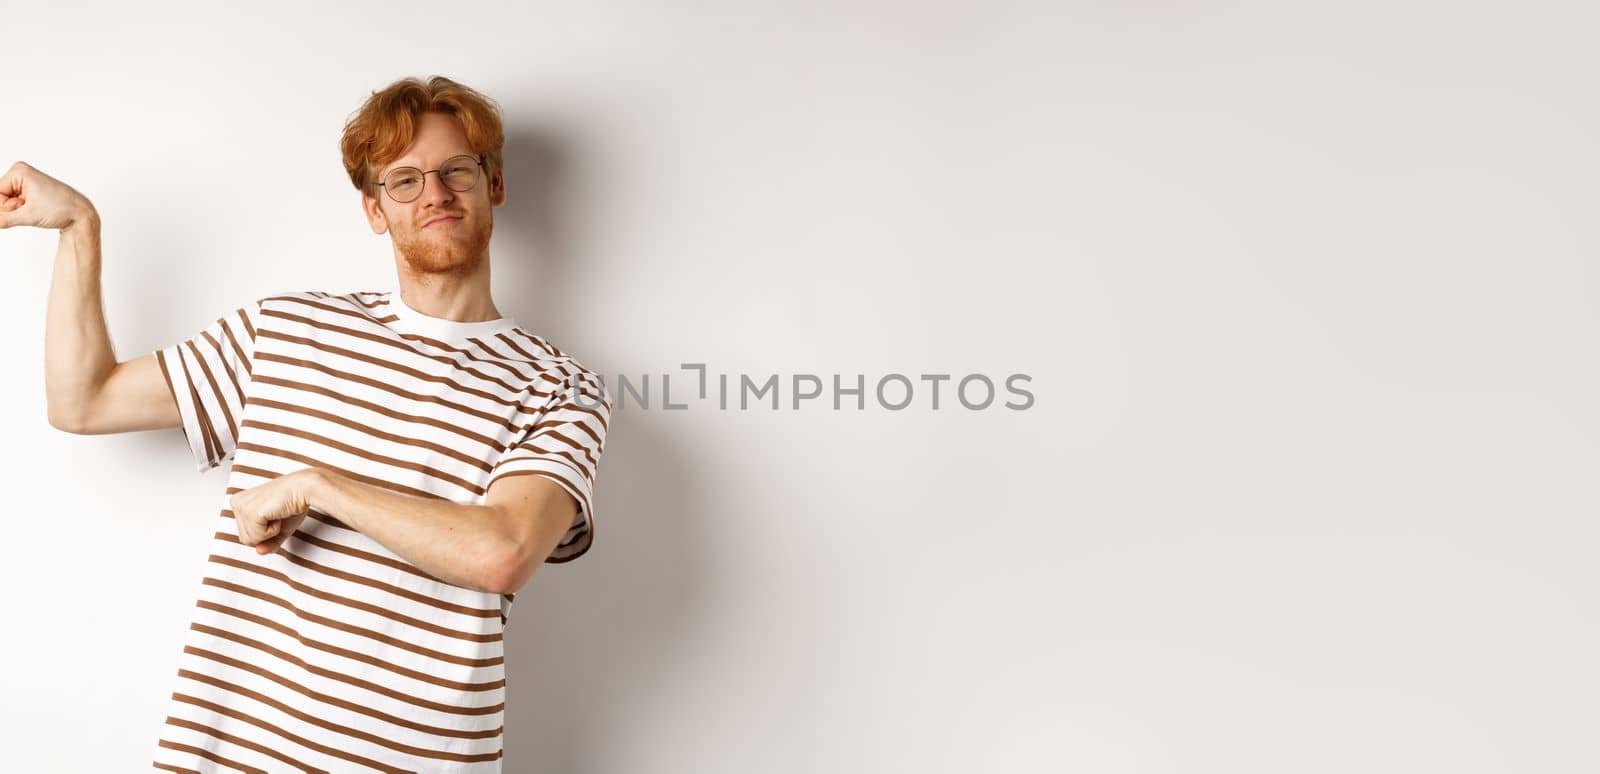 Image of confident and strong redhead man flexing biceps, showing muscles after gym, standing over white background.